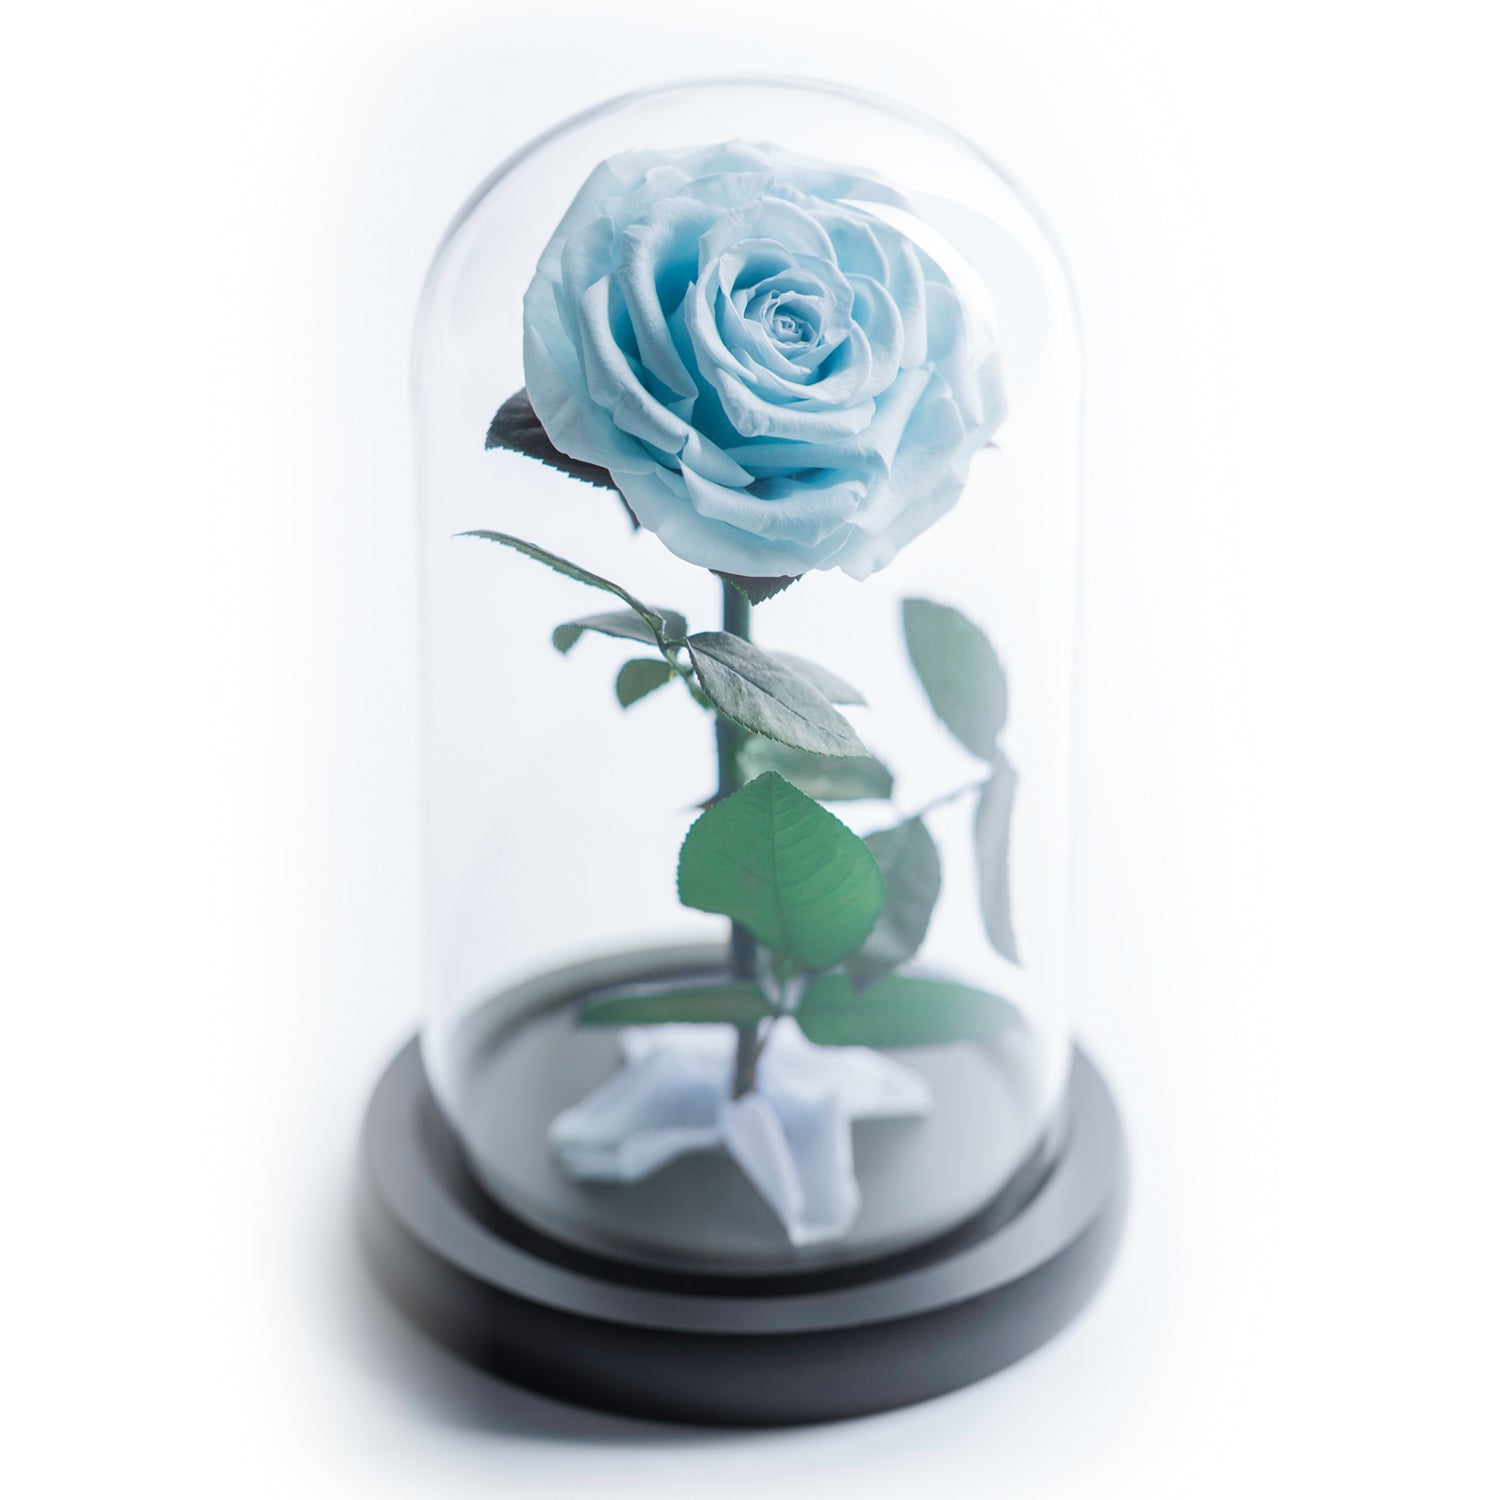 The Beauty and the Beast contains one blue color eternity rose, picked at the point of perfection and preserved to last at least one year. Rose in small glass dome